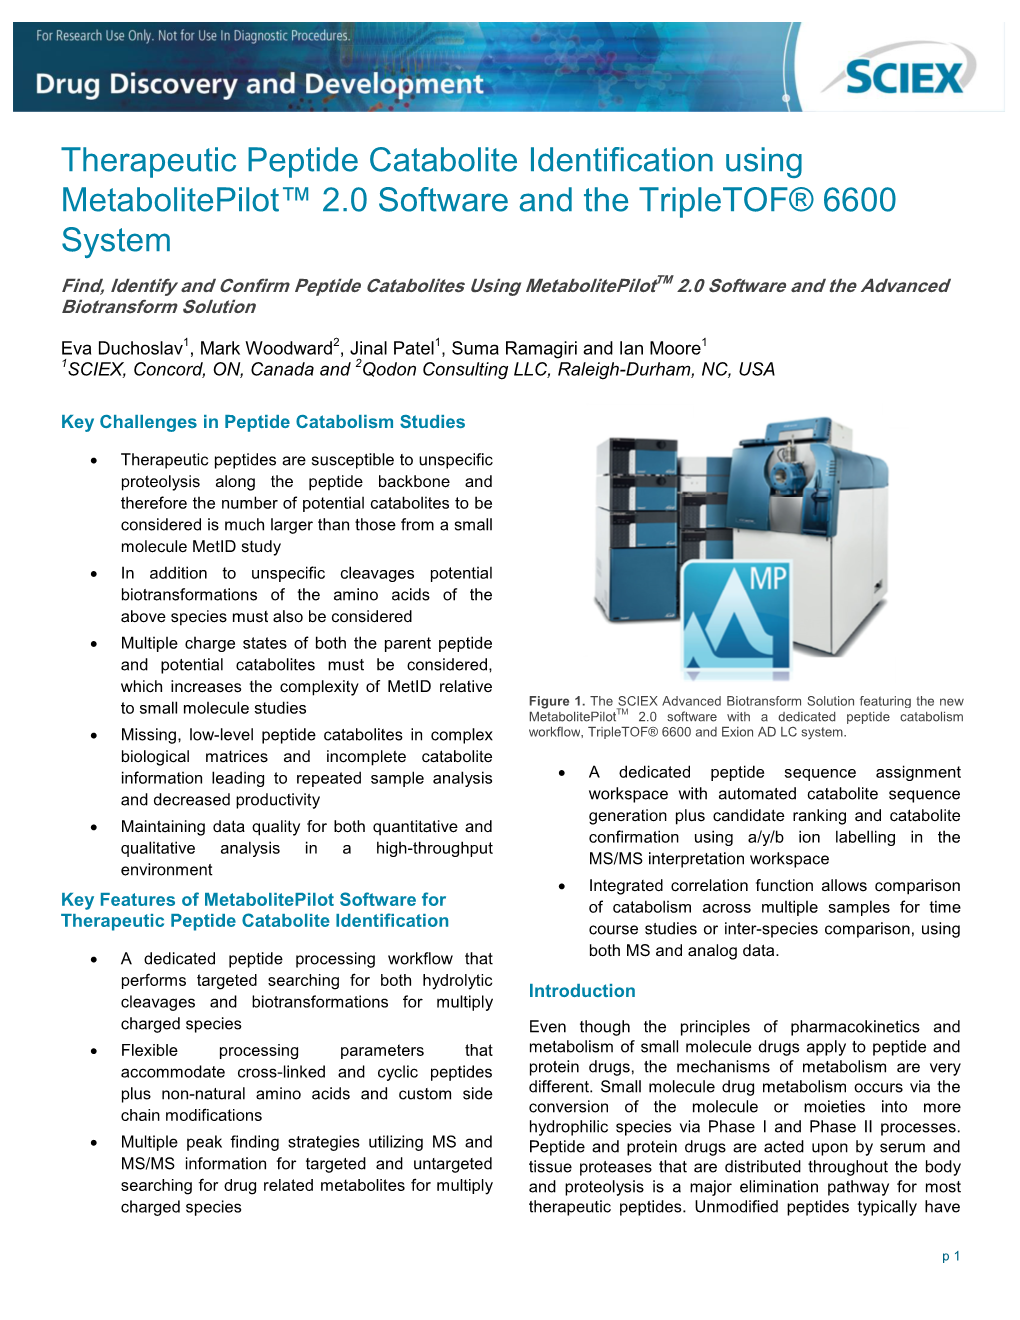 Therapeutic Peptide Catabolite Identification Using Metabolitepilot™ 2.0 Software and the Tripletof® 6600 System